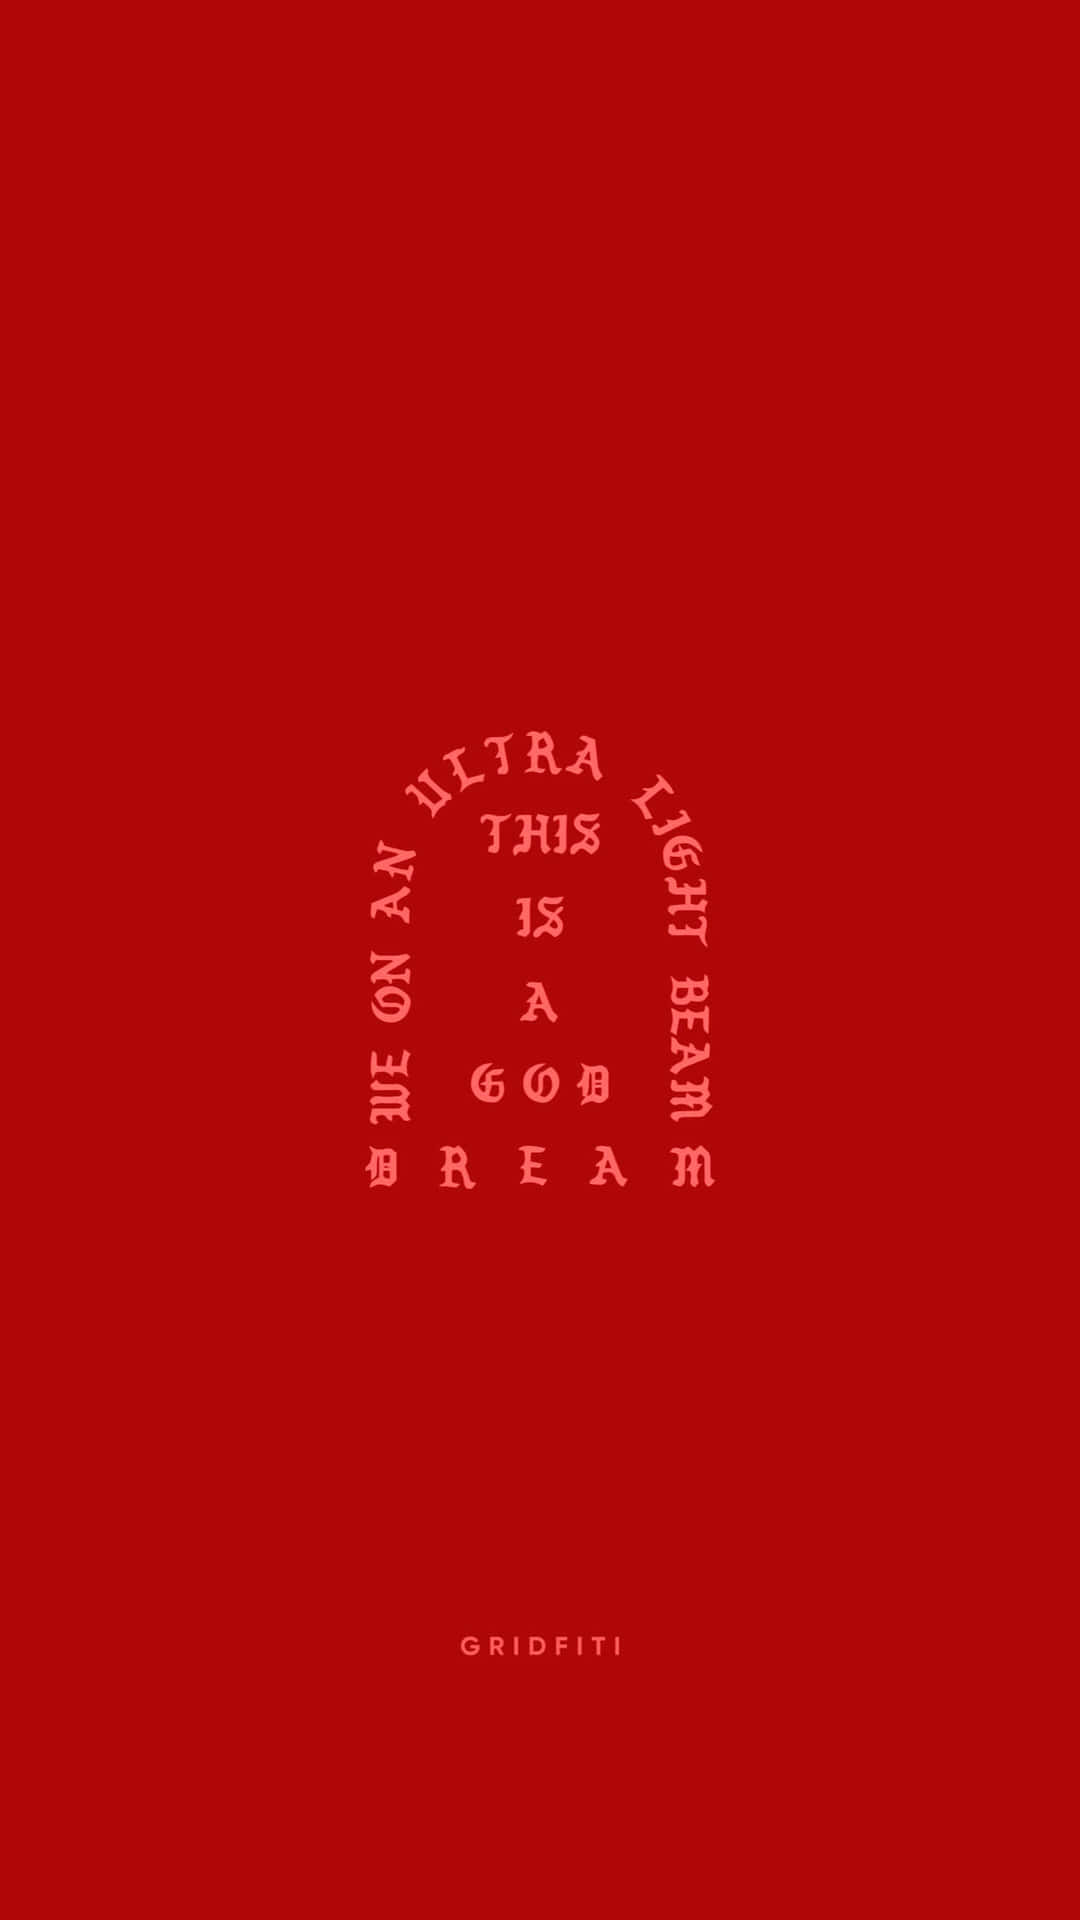 Kanyewest Udgiver 'the Life Of Pablo' Wallpaper